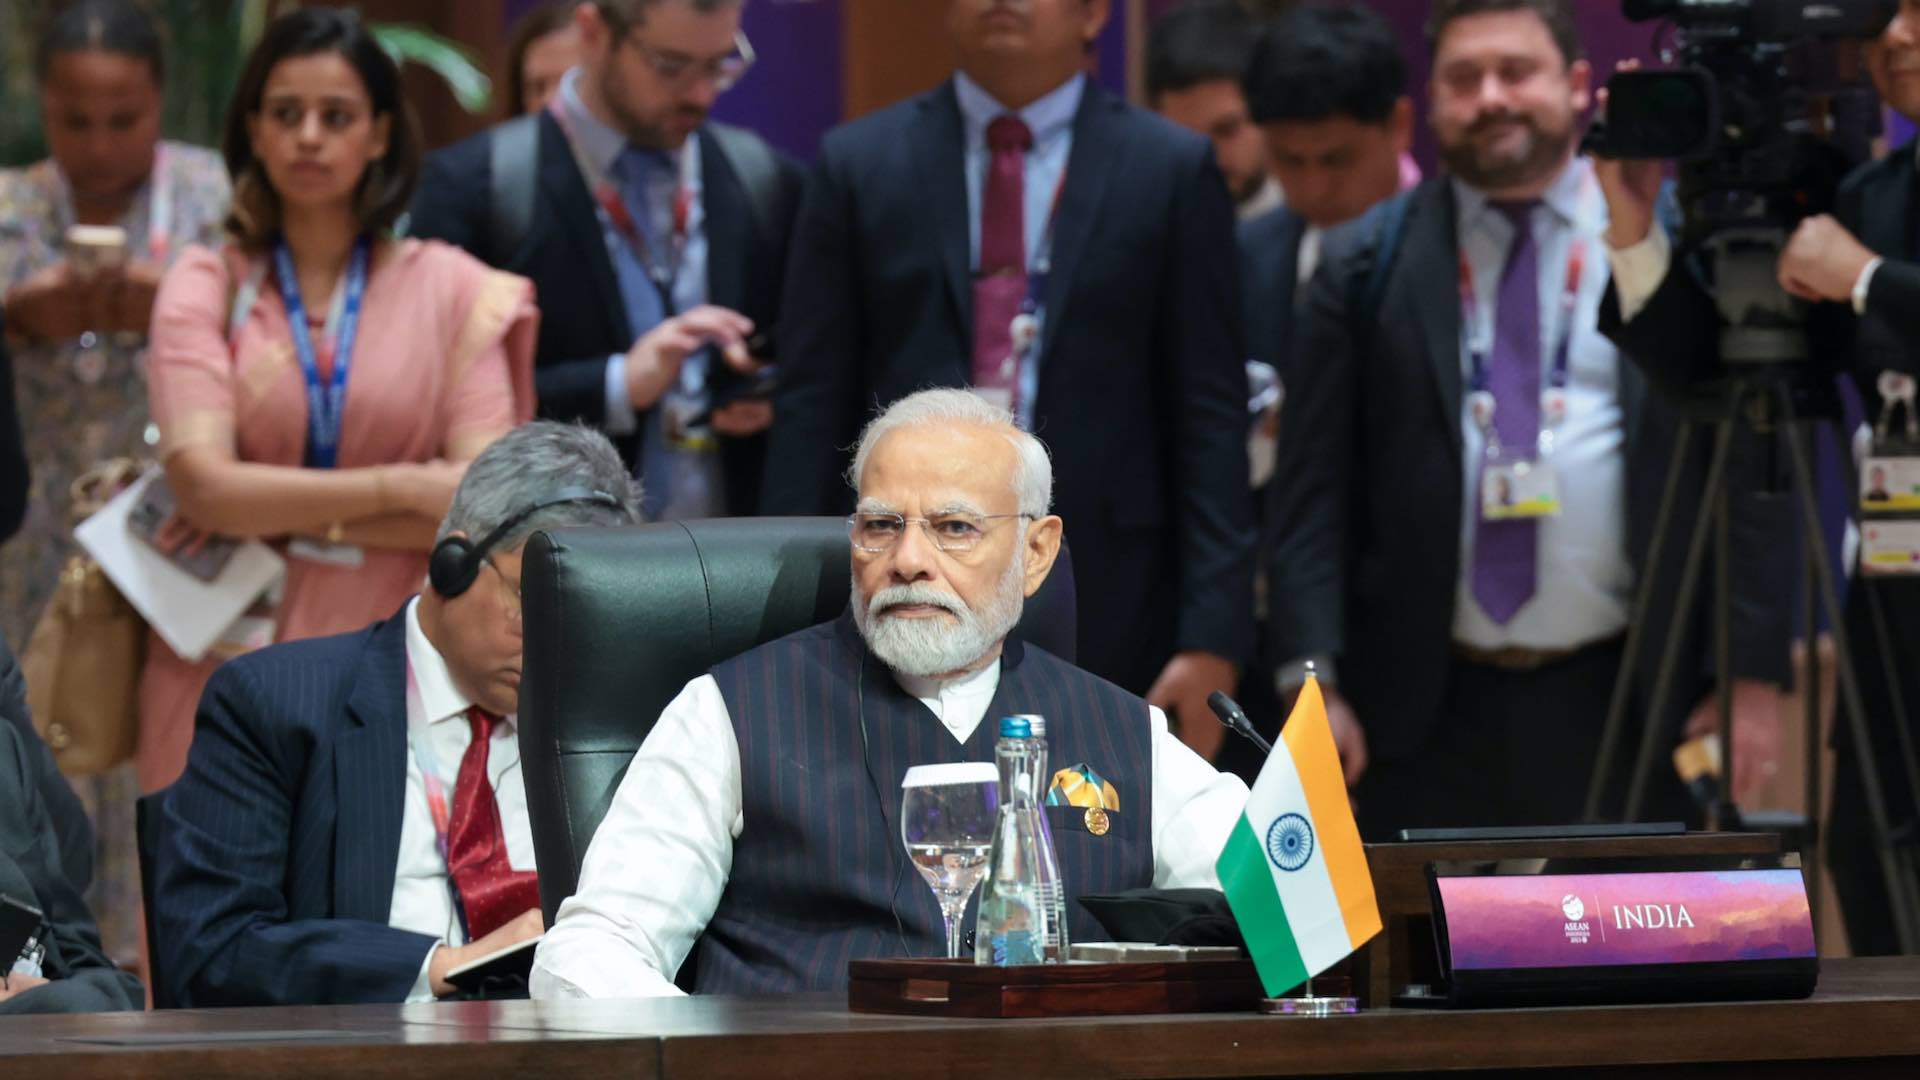 ASEAN Summit in Jakarta sees PM Modi advocating India's growing global impact